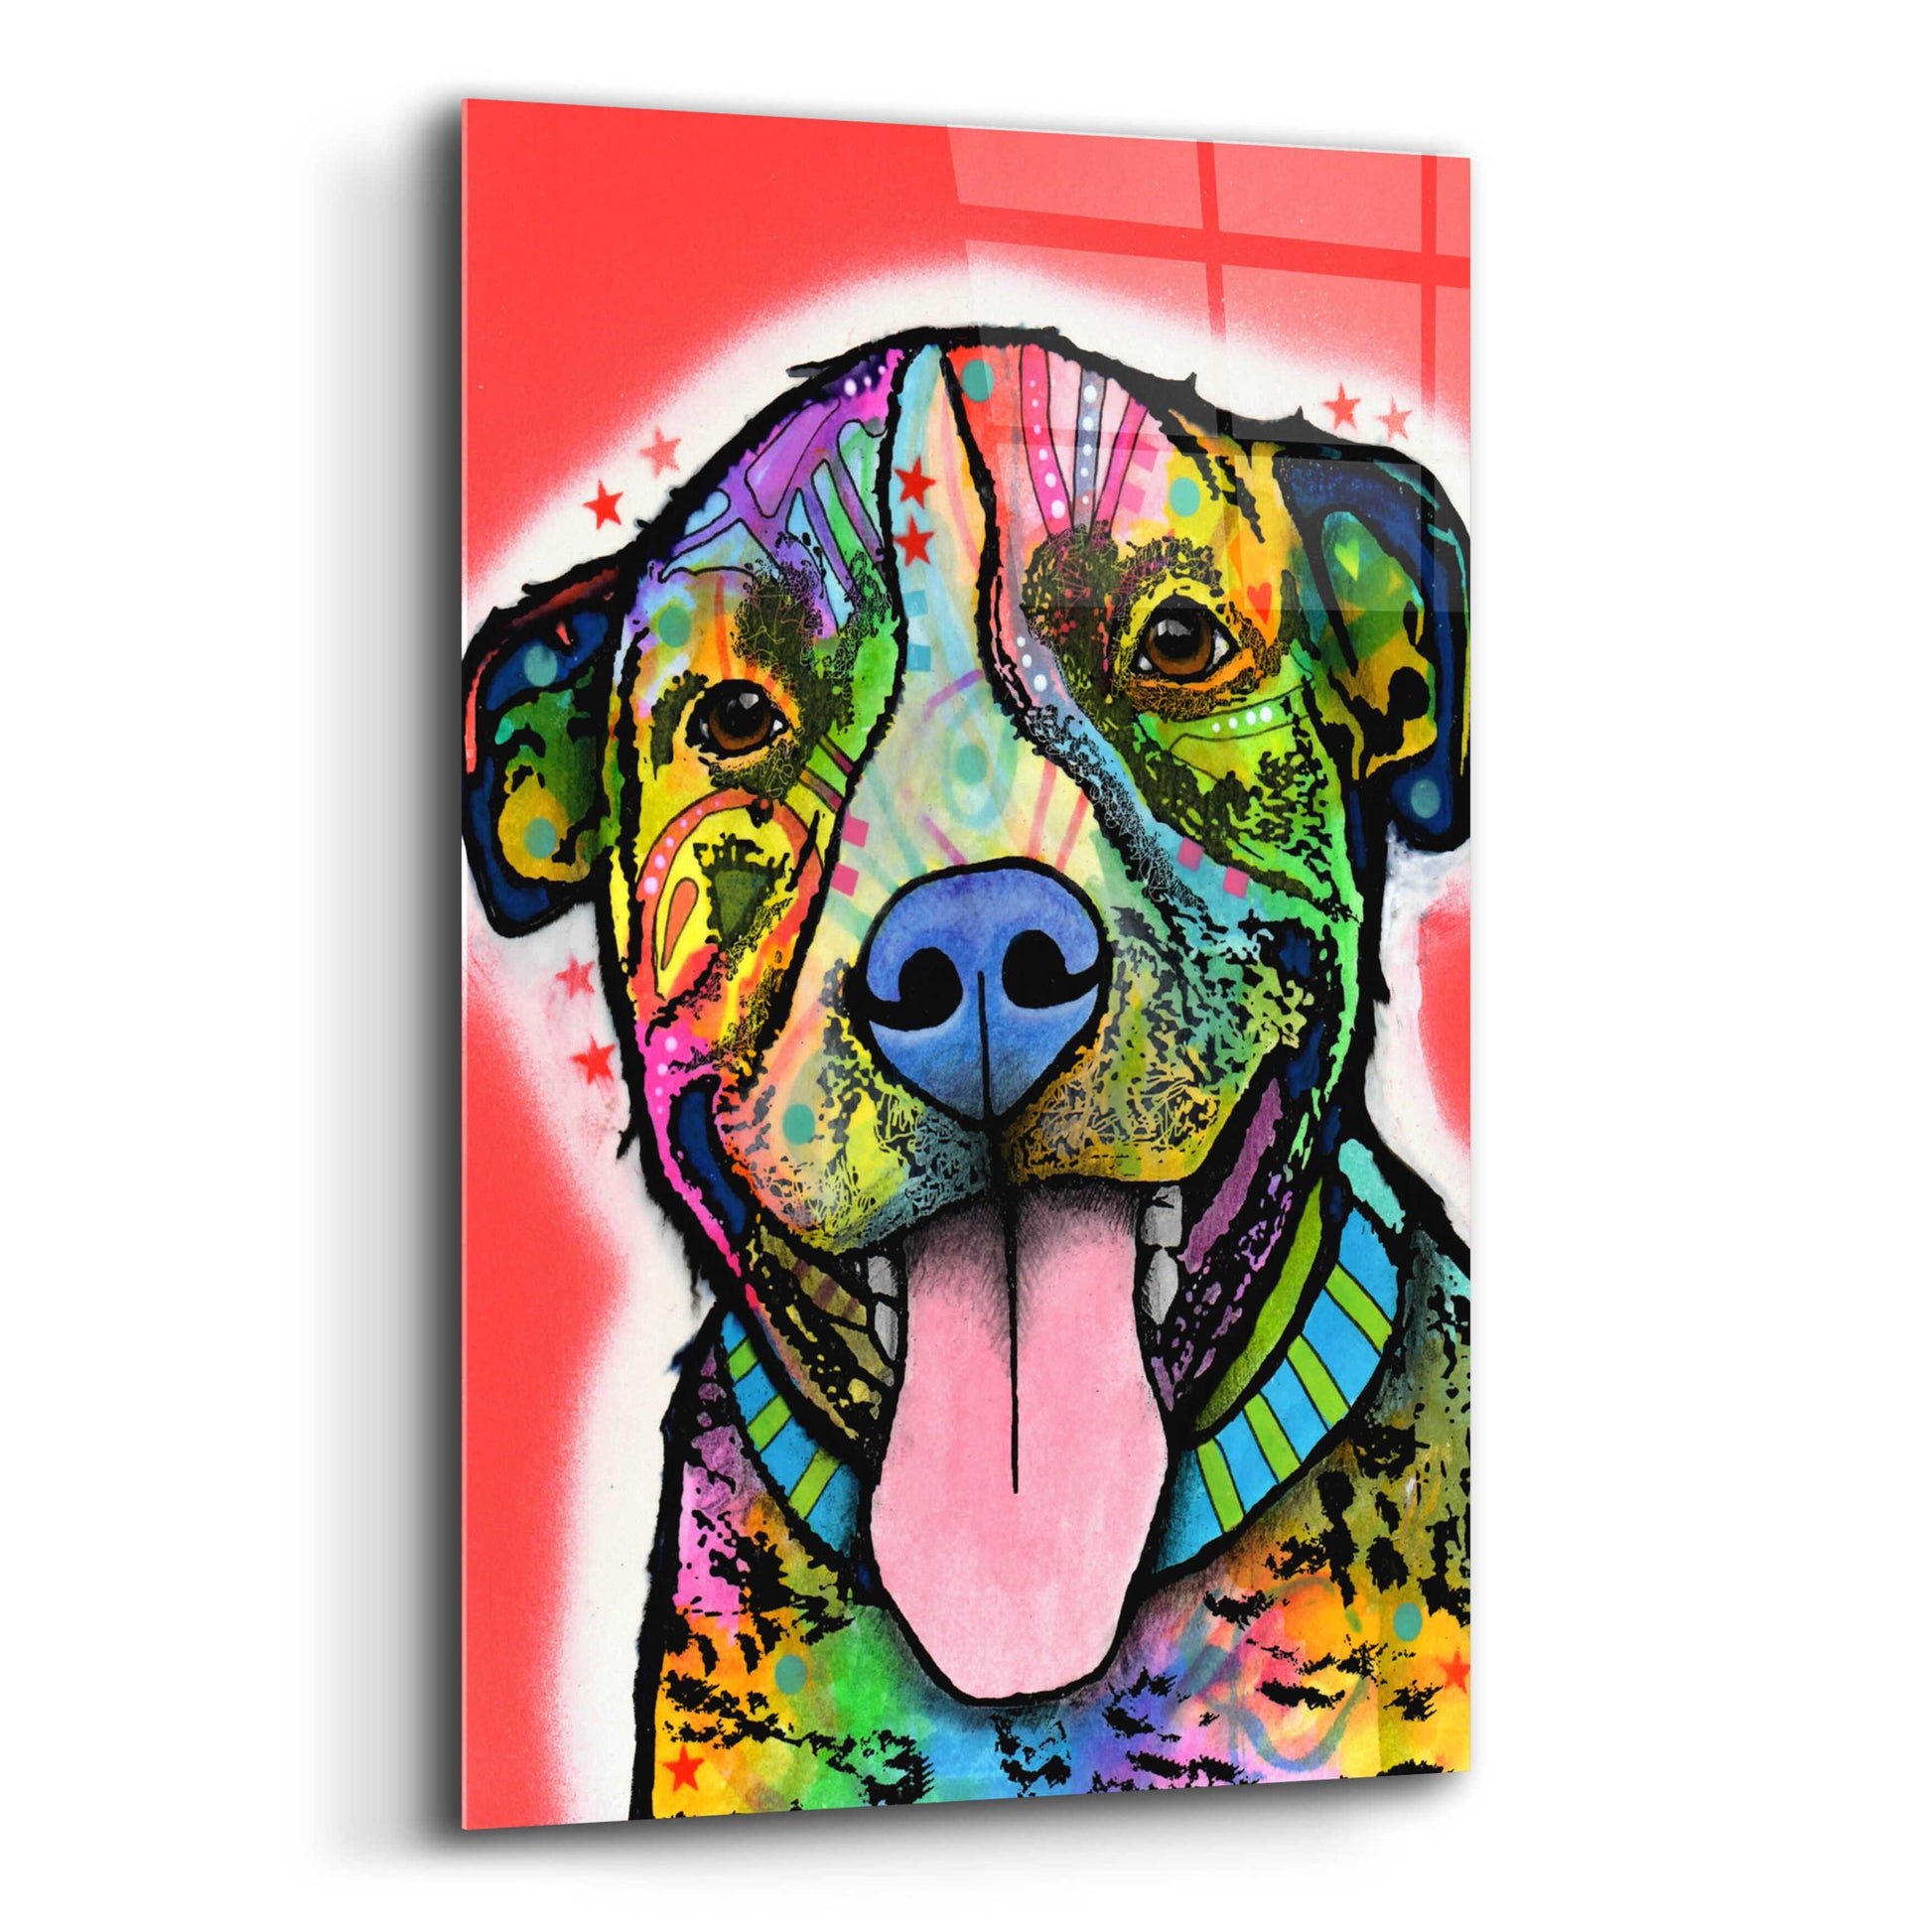 Epic Art 'Smiling Pit Bull zoey' by Dean Russo, Acrylic Glass Wall Art,16x24